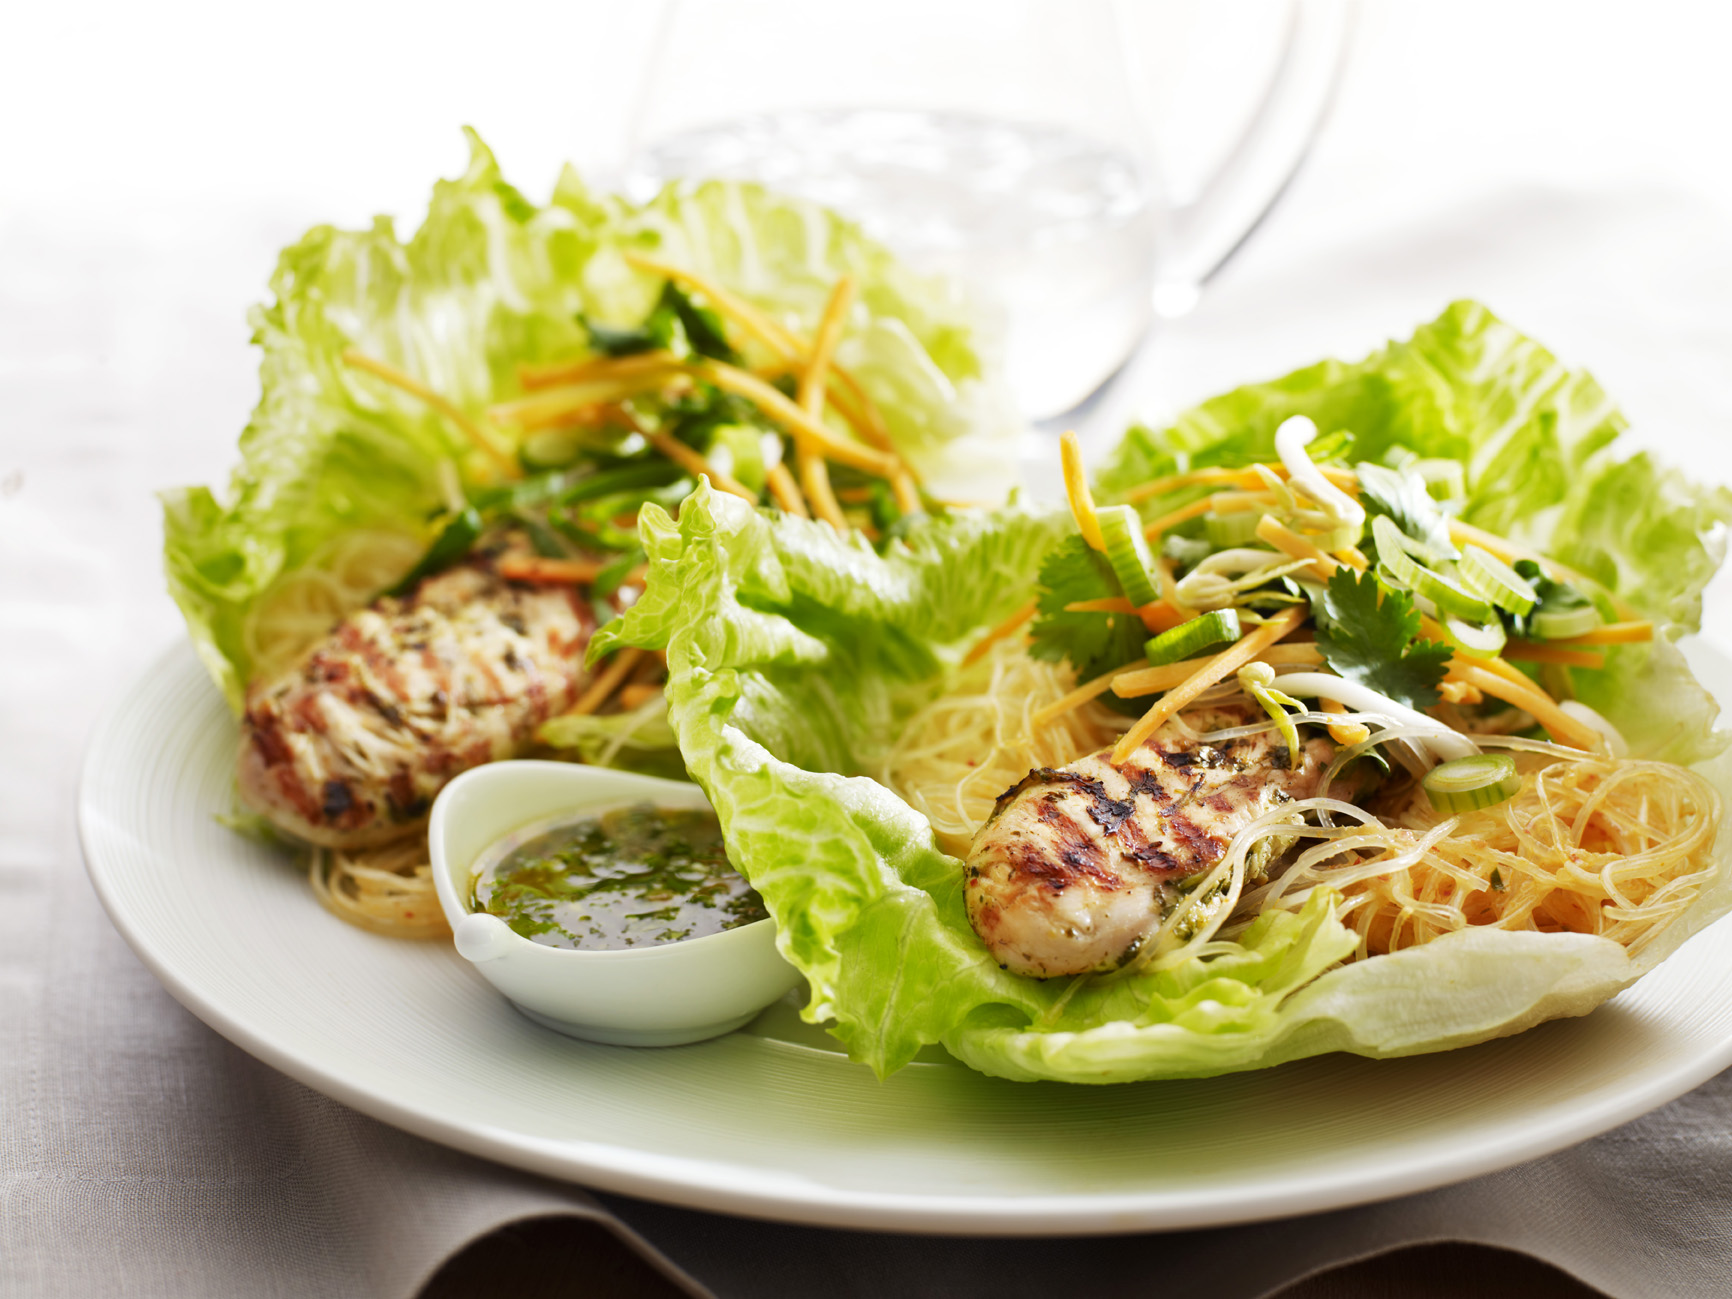 Grilled chicken and noodles lettuce wraps